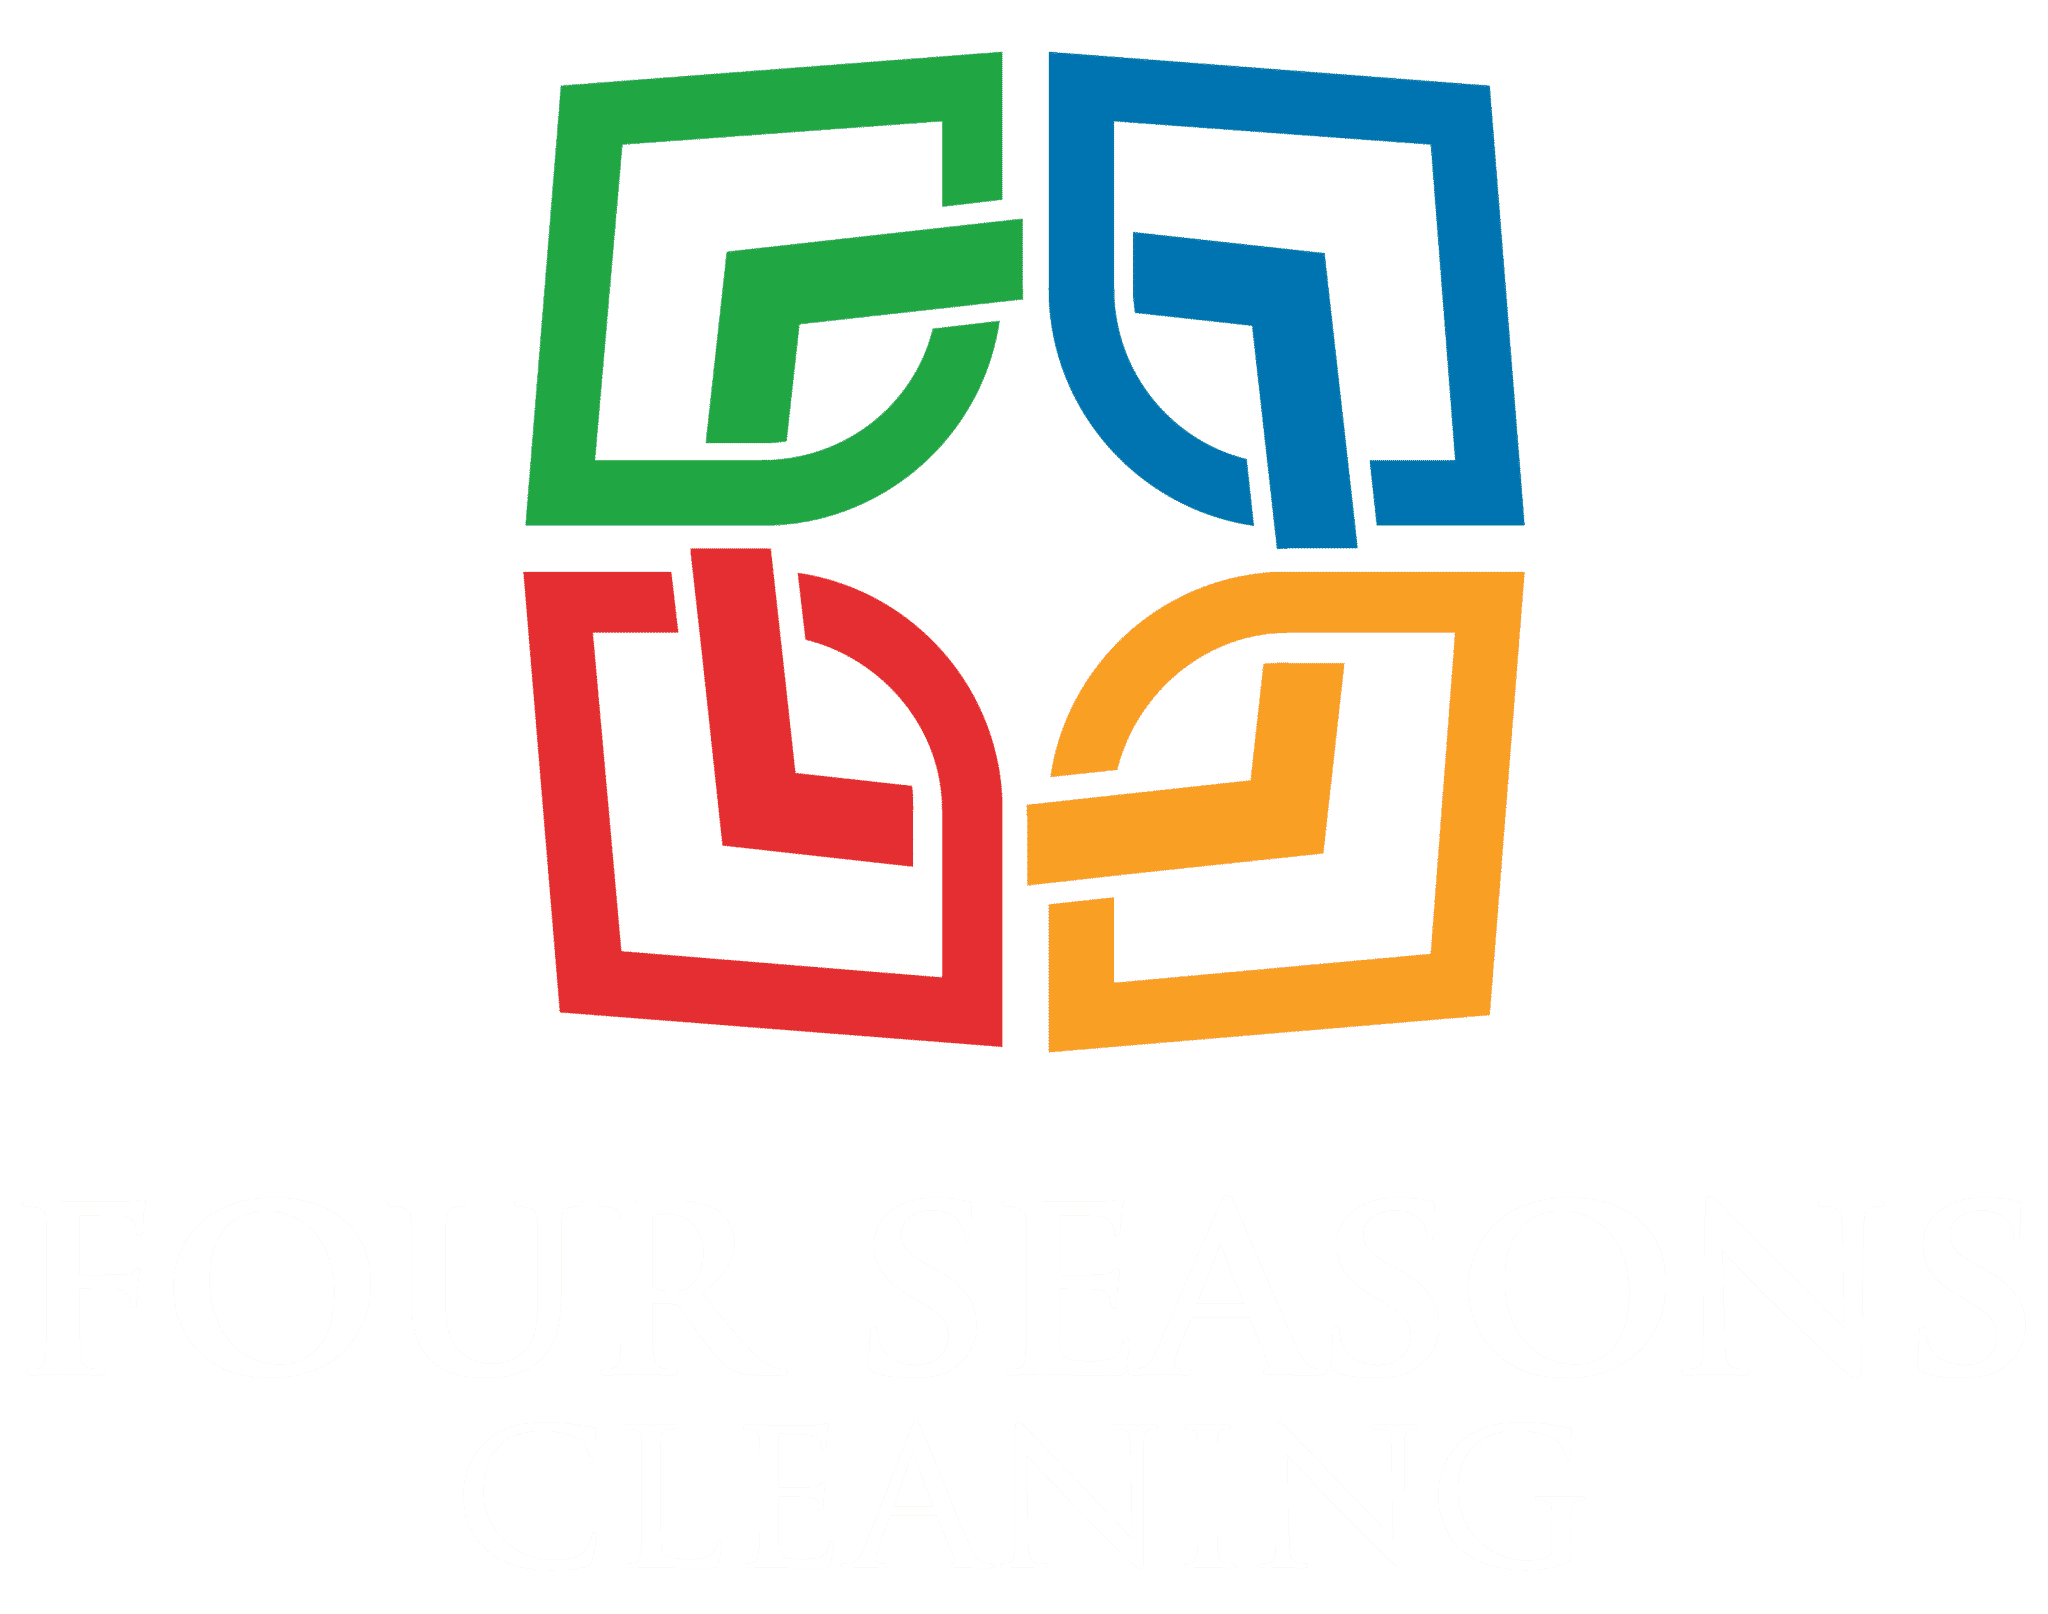 Four Seasons Cleaning